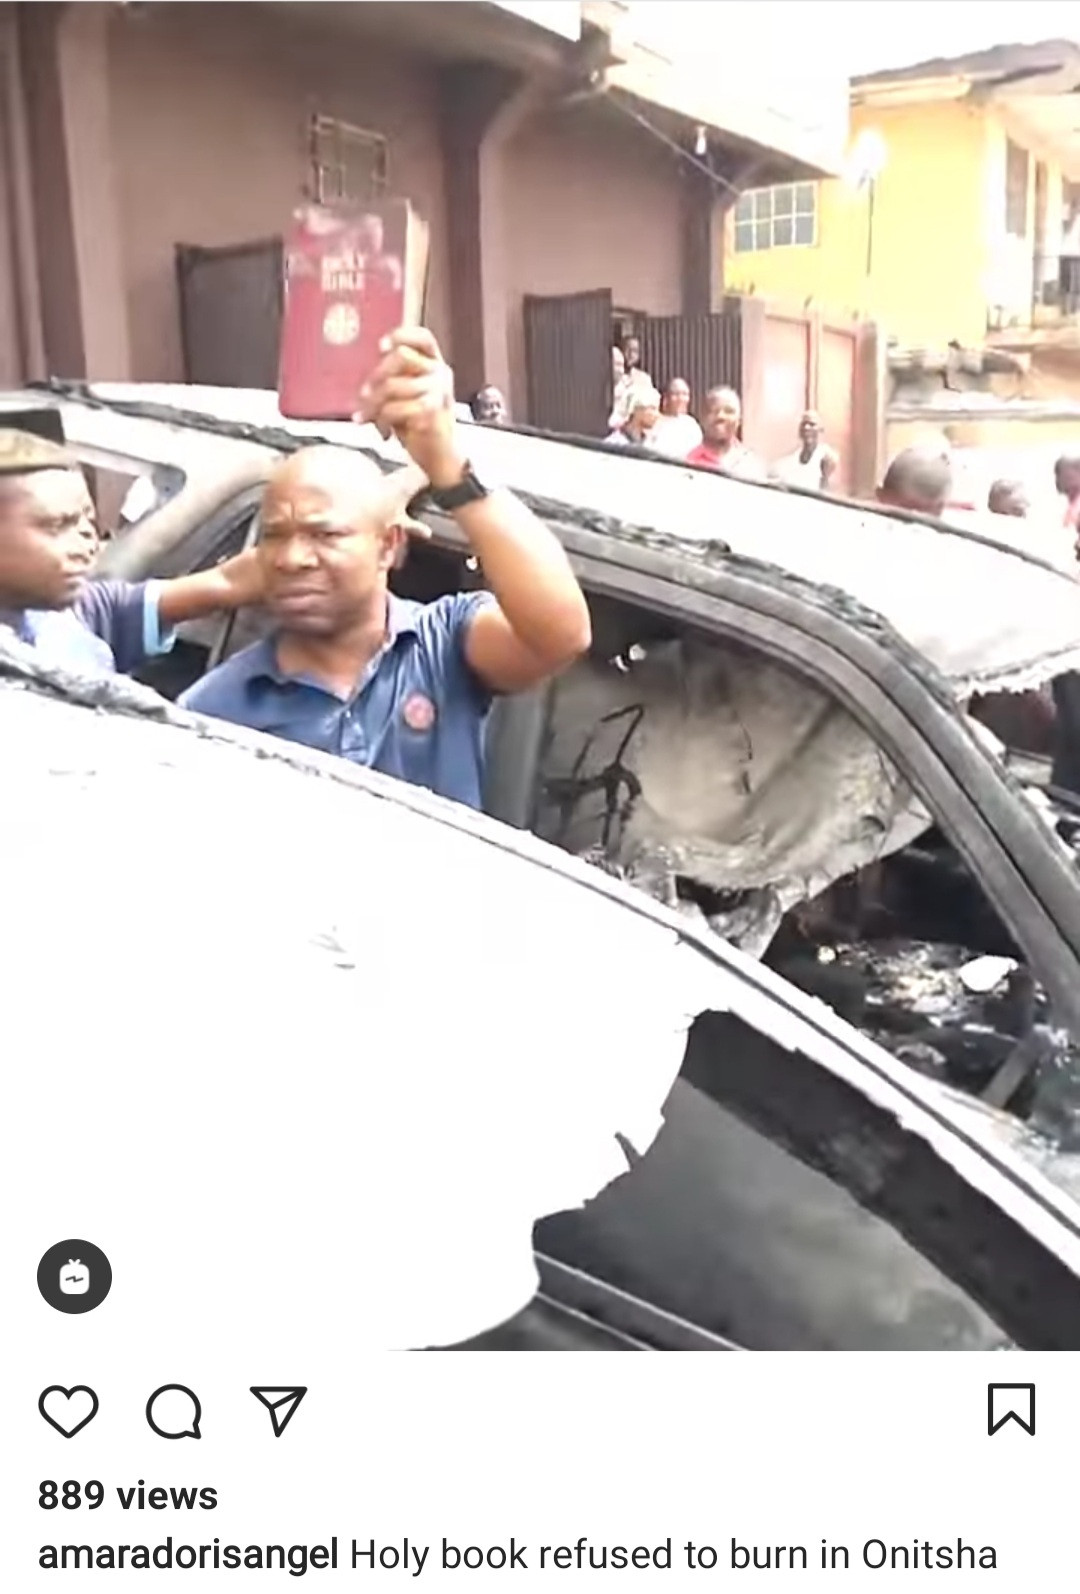 Bible remains intact as fire destroys car and everything inside it in Onitsha, Anambra state (video)